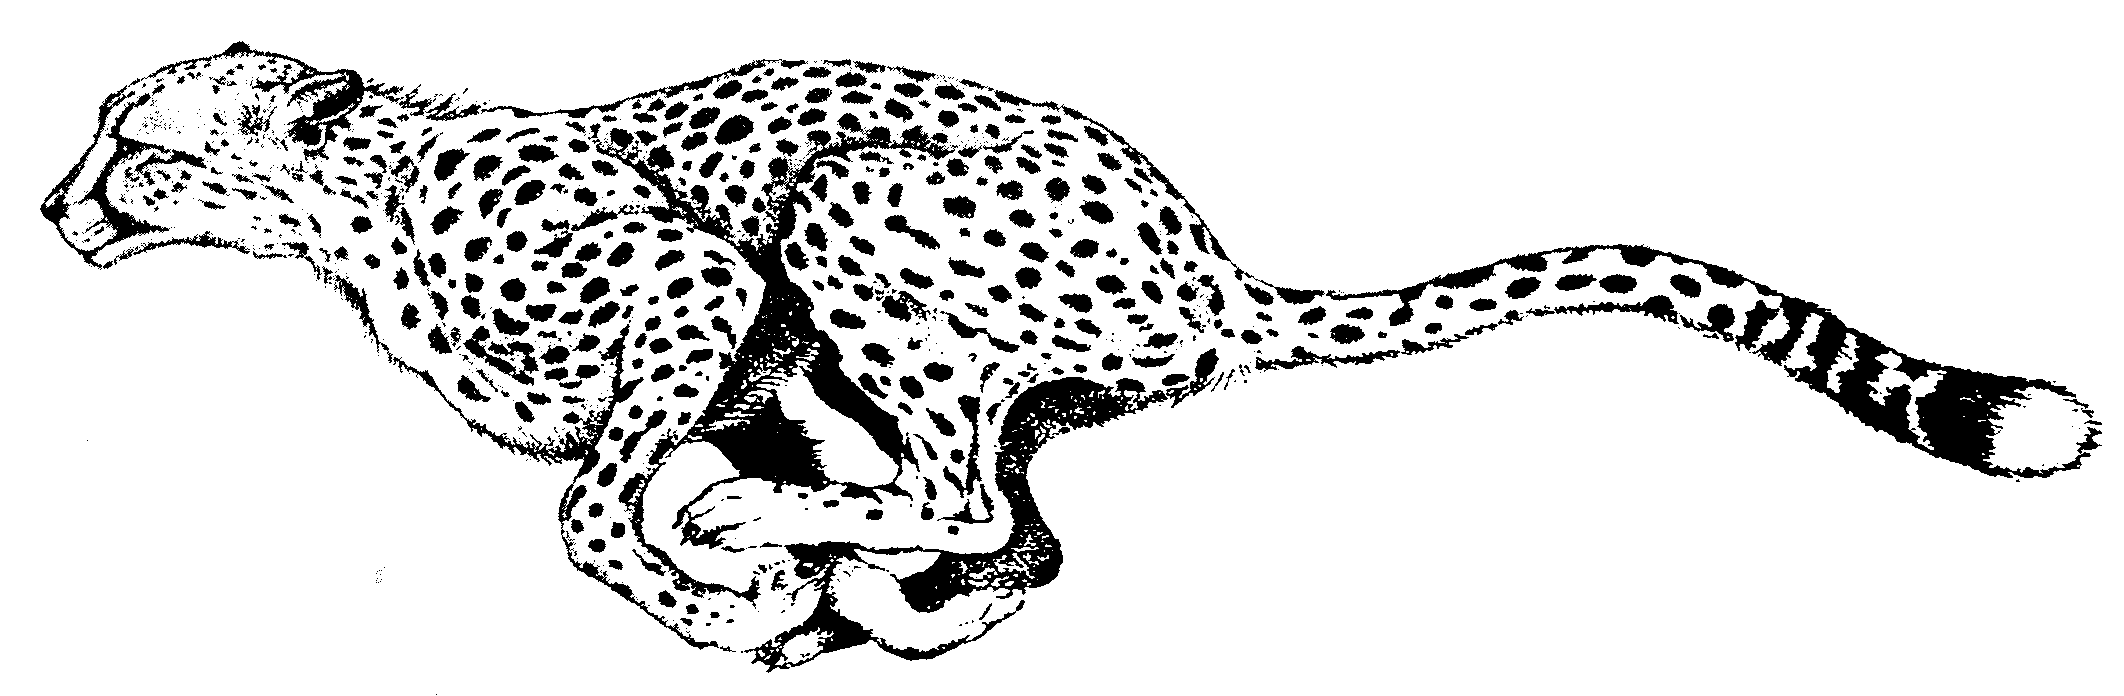 Free Cheetah Silhouette Cliparts, Download Free Clip Art